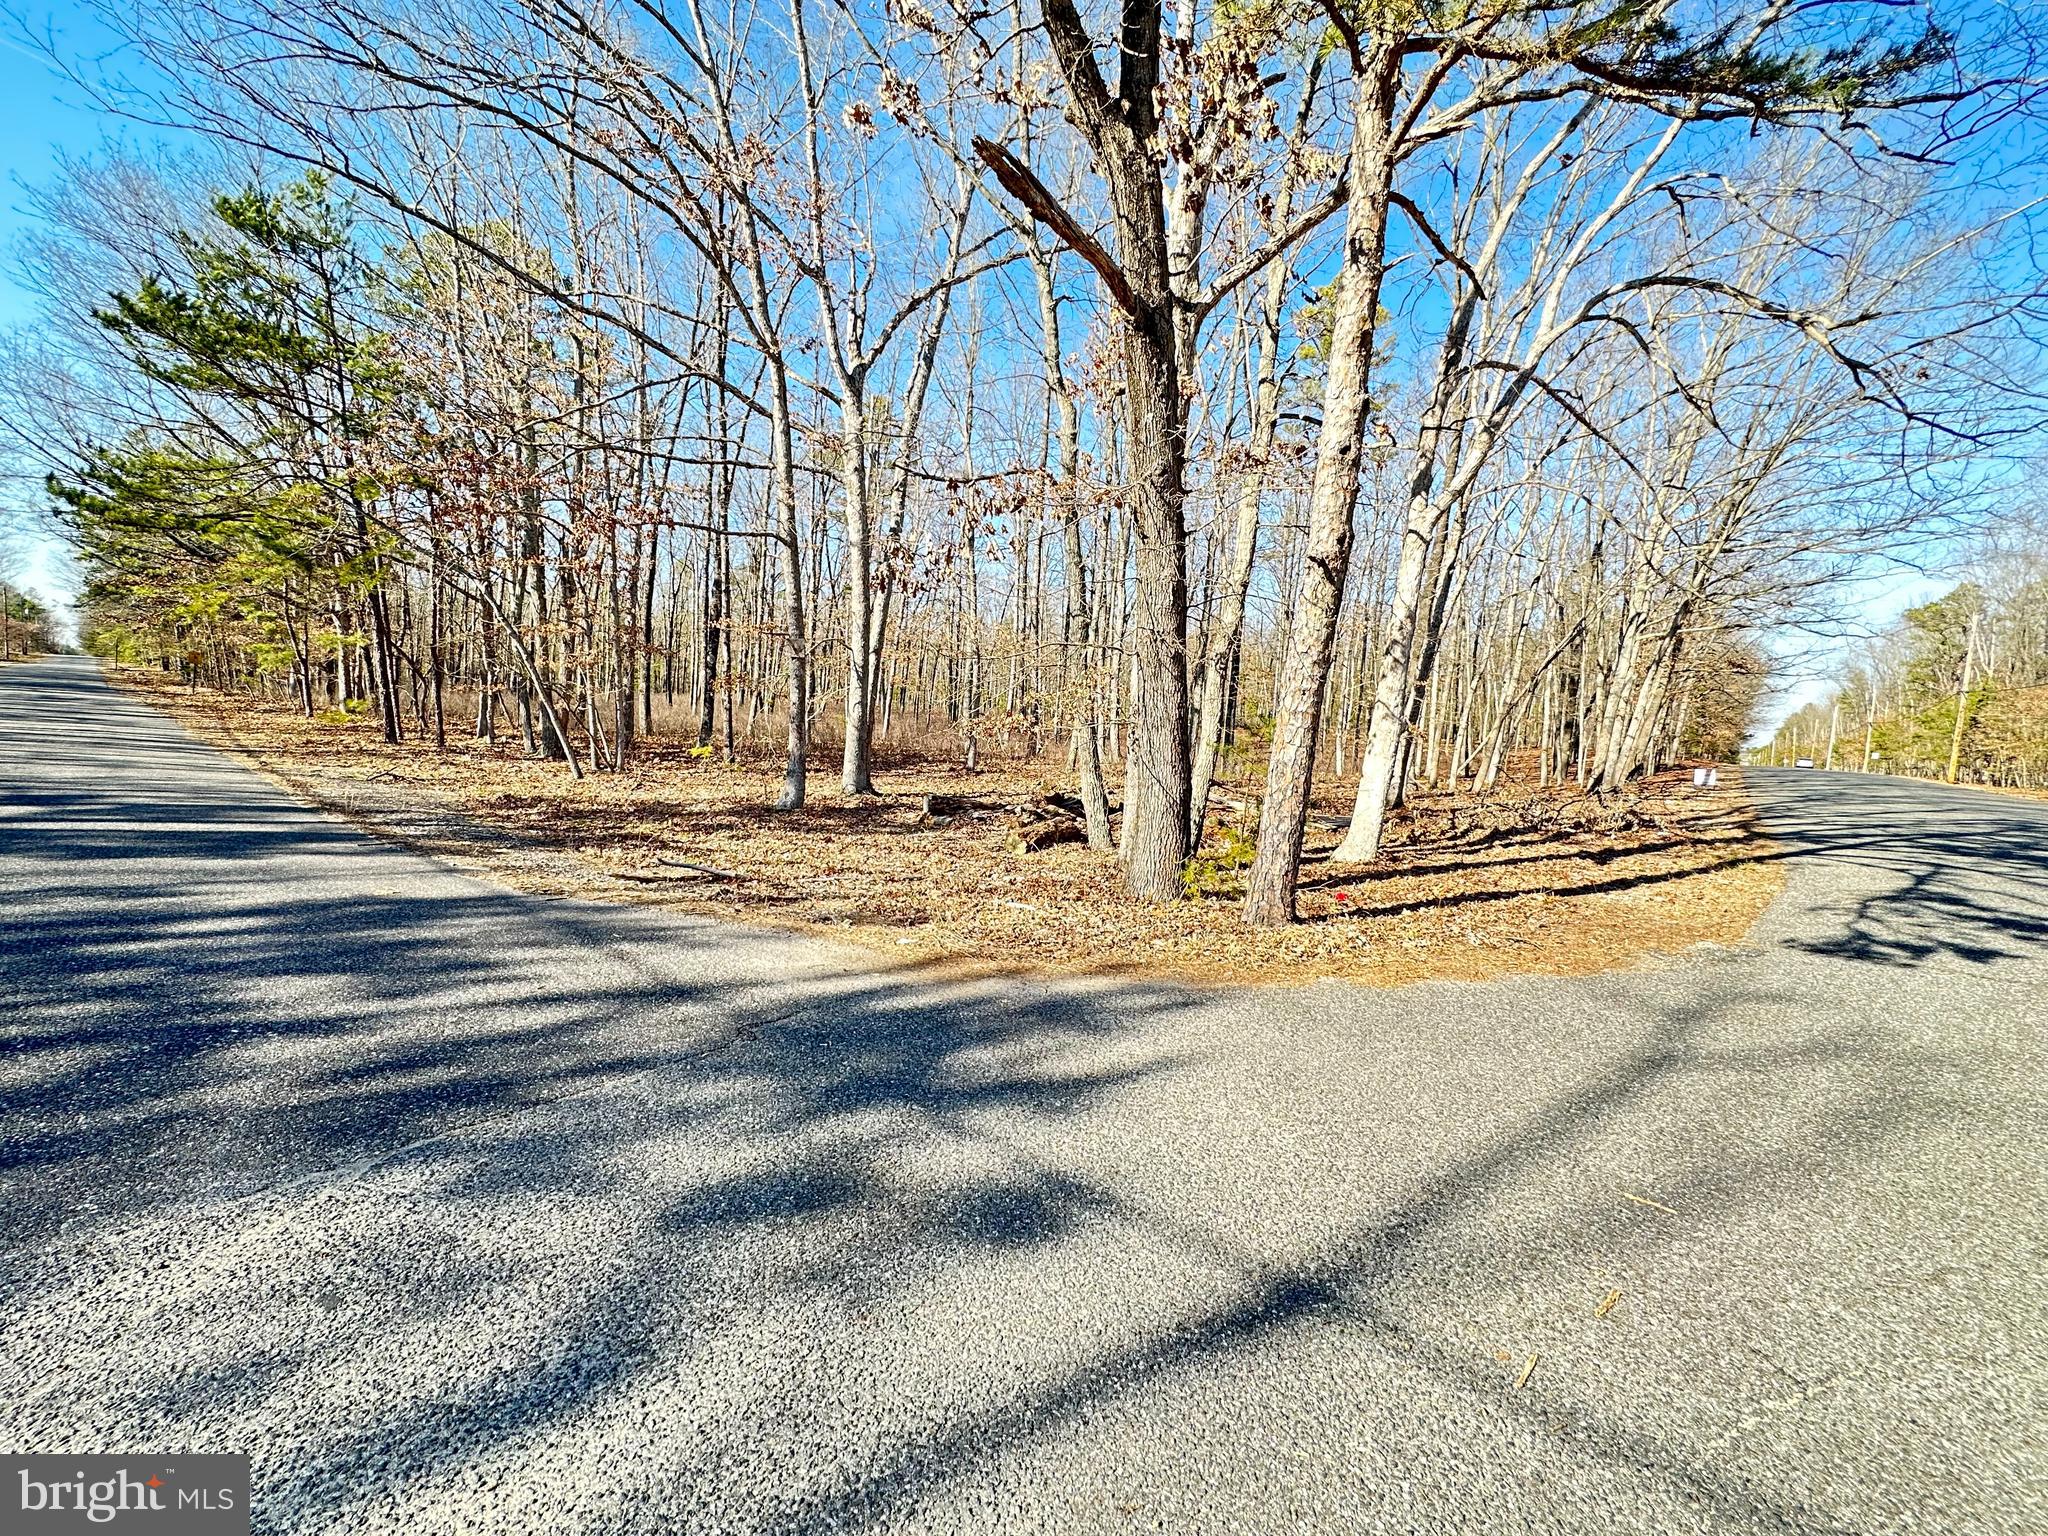 a view of road with large trees